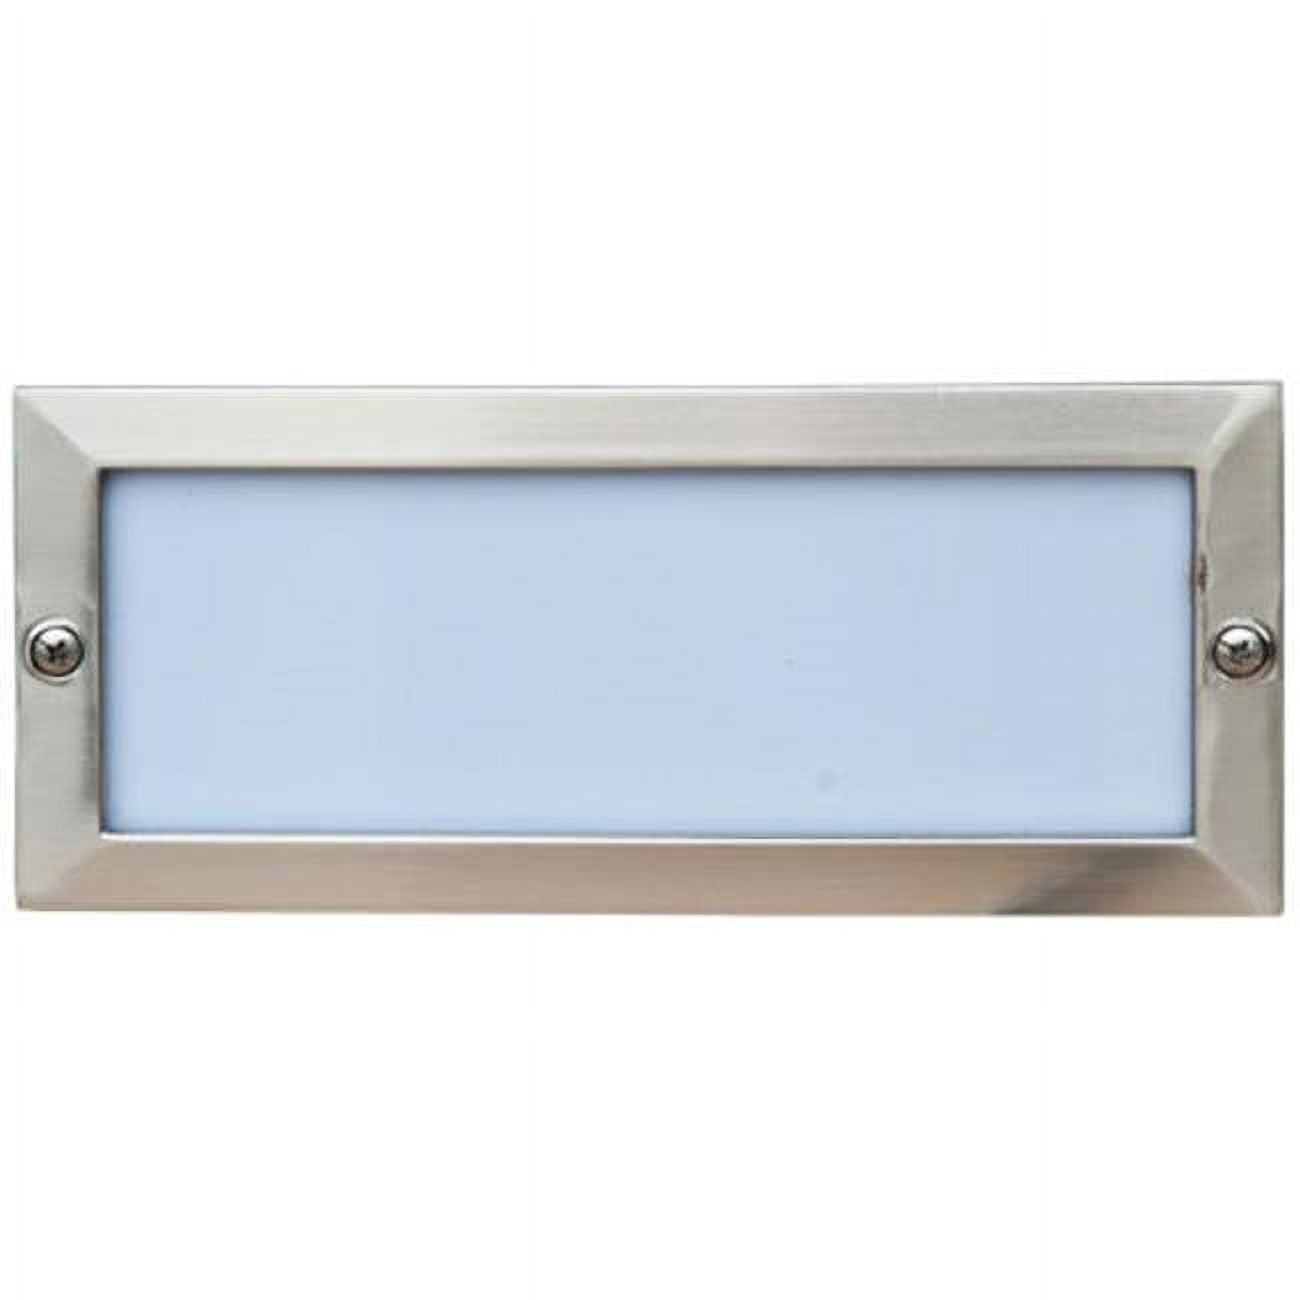 Picture of Dabmar Lighting LV602-SS Cast Aluminum Recessed Open Face Brick, Step & Wall Light, Electro-Plated Stainless Steel - 4 x 9.13 x 3.25 in.